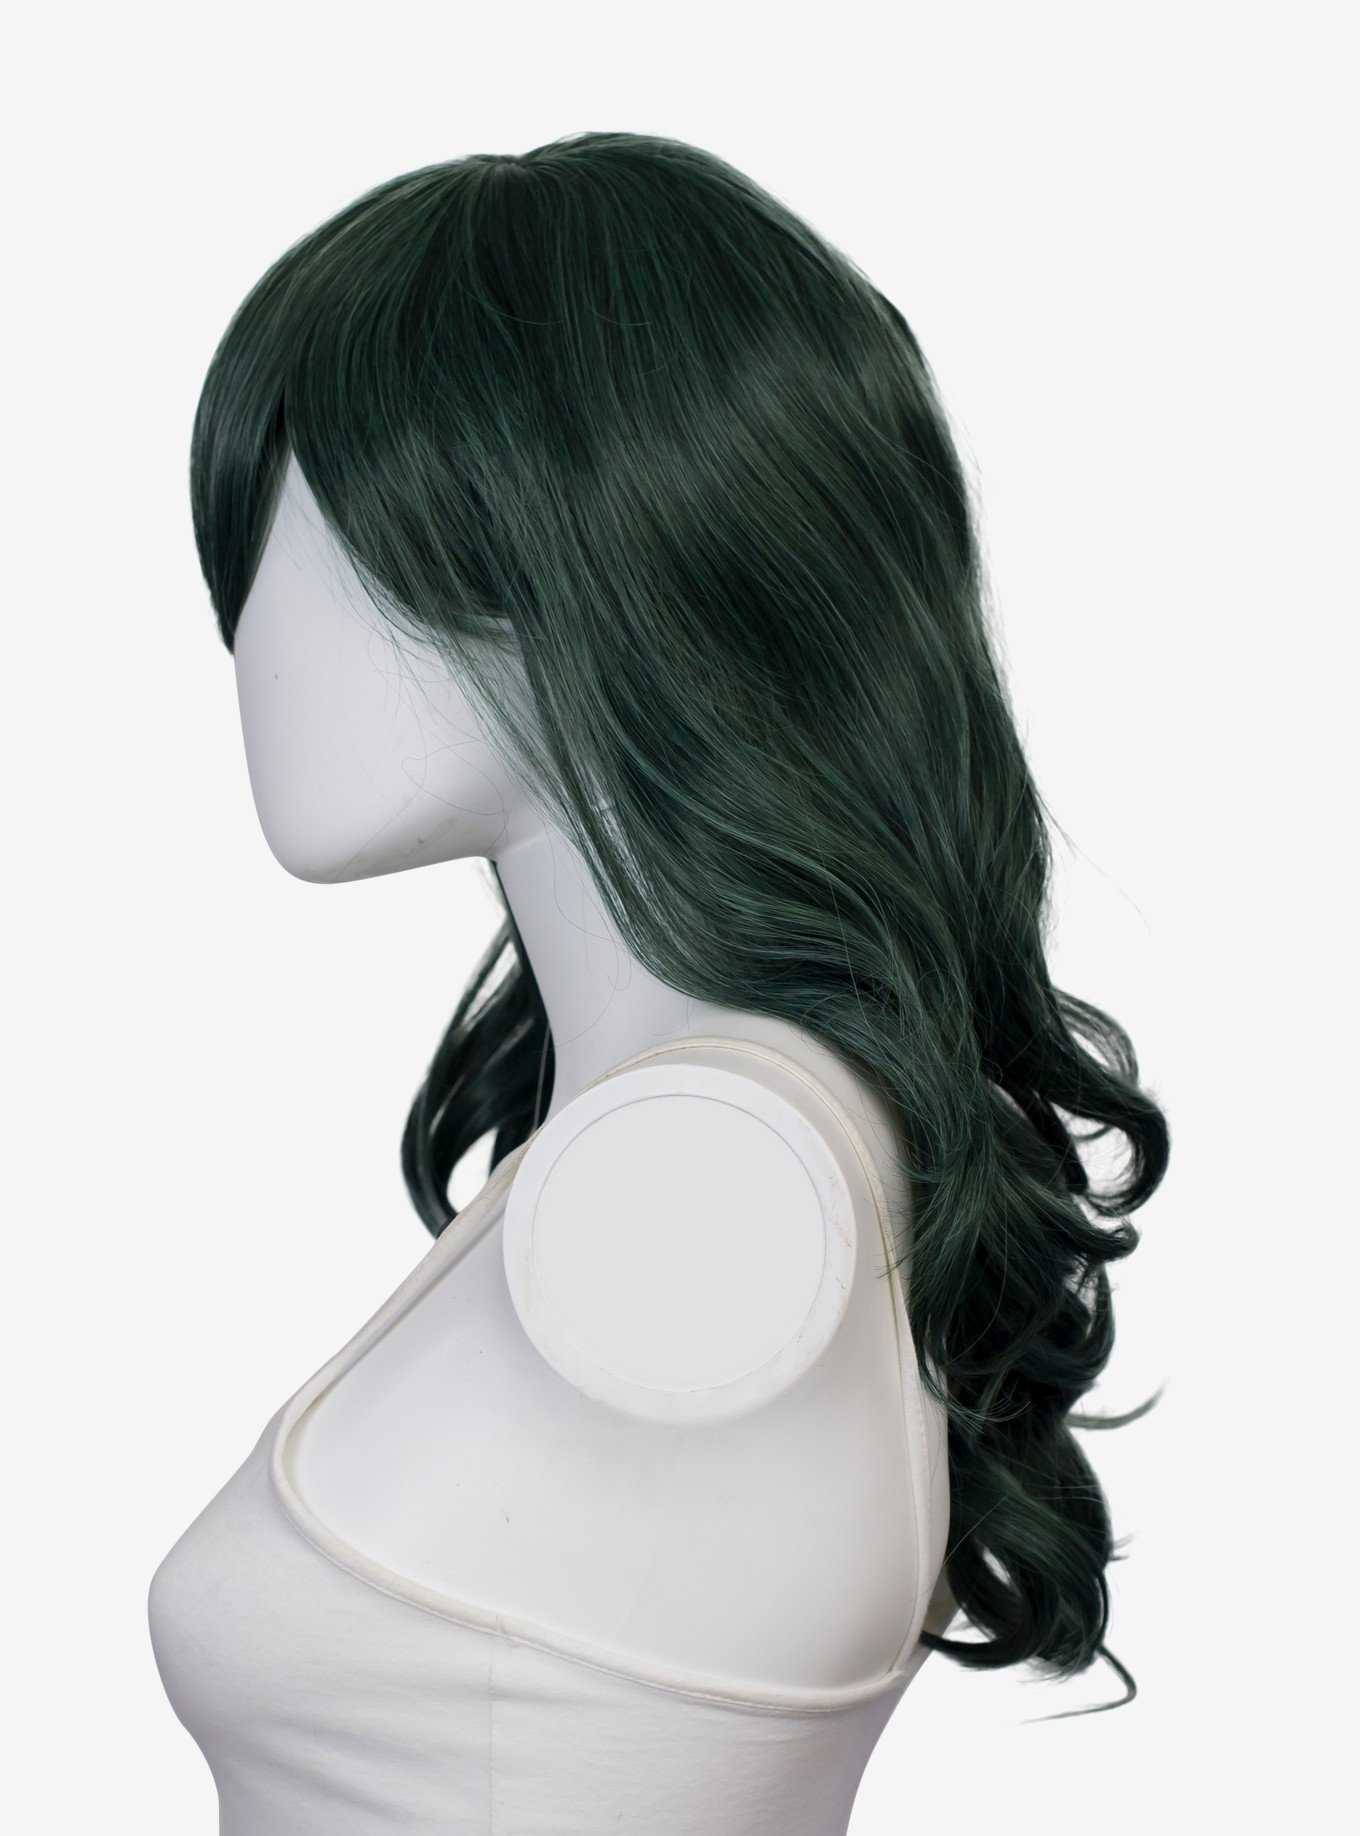 Epic Cosplay Hestia Forest Green Mix Shoulder Length Curly Wig, , hi-res